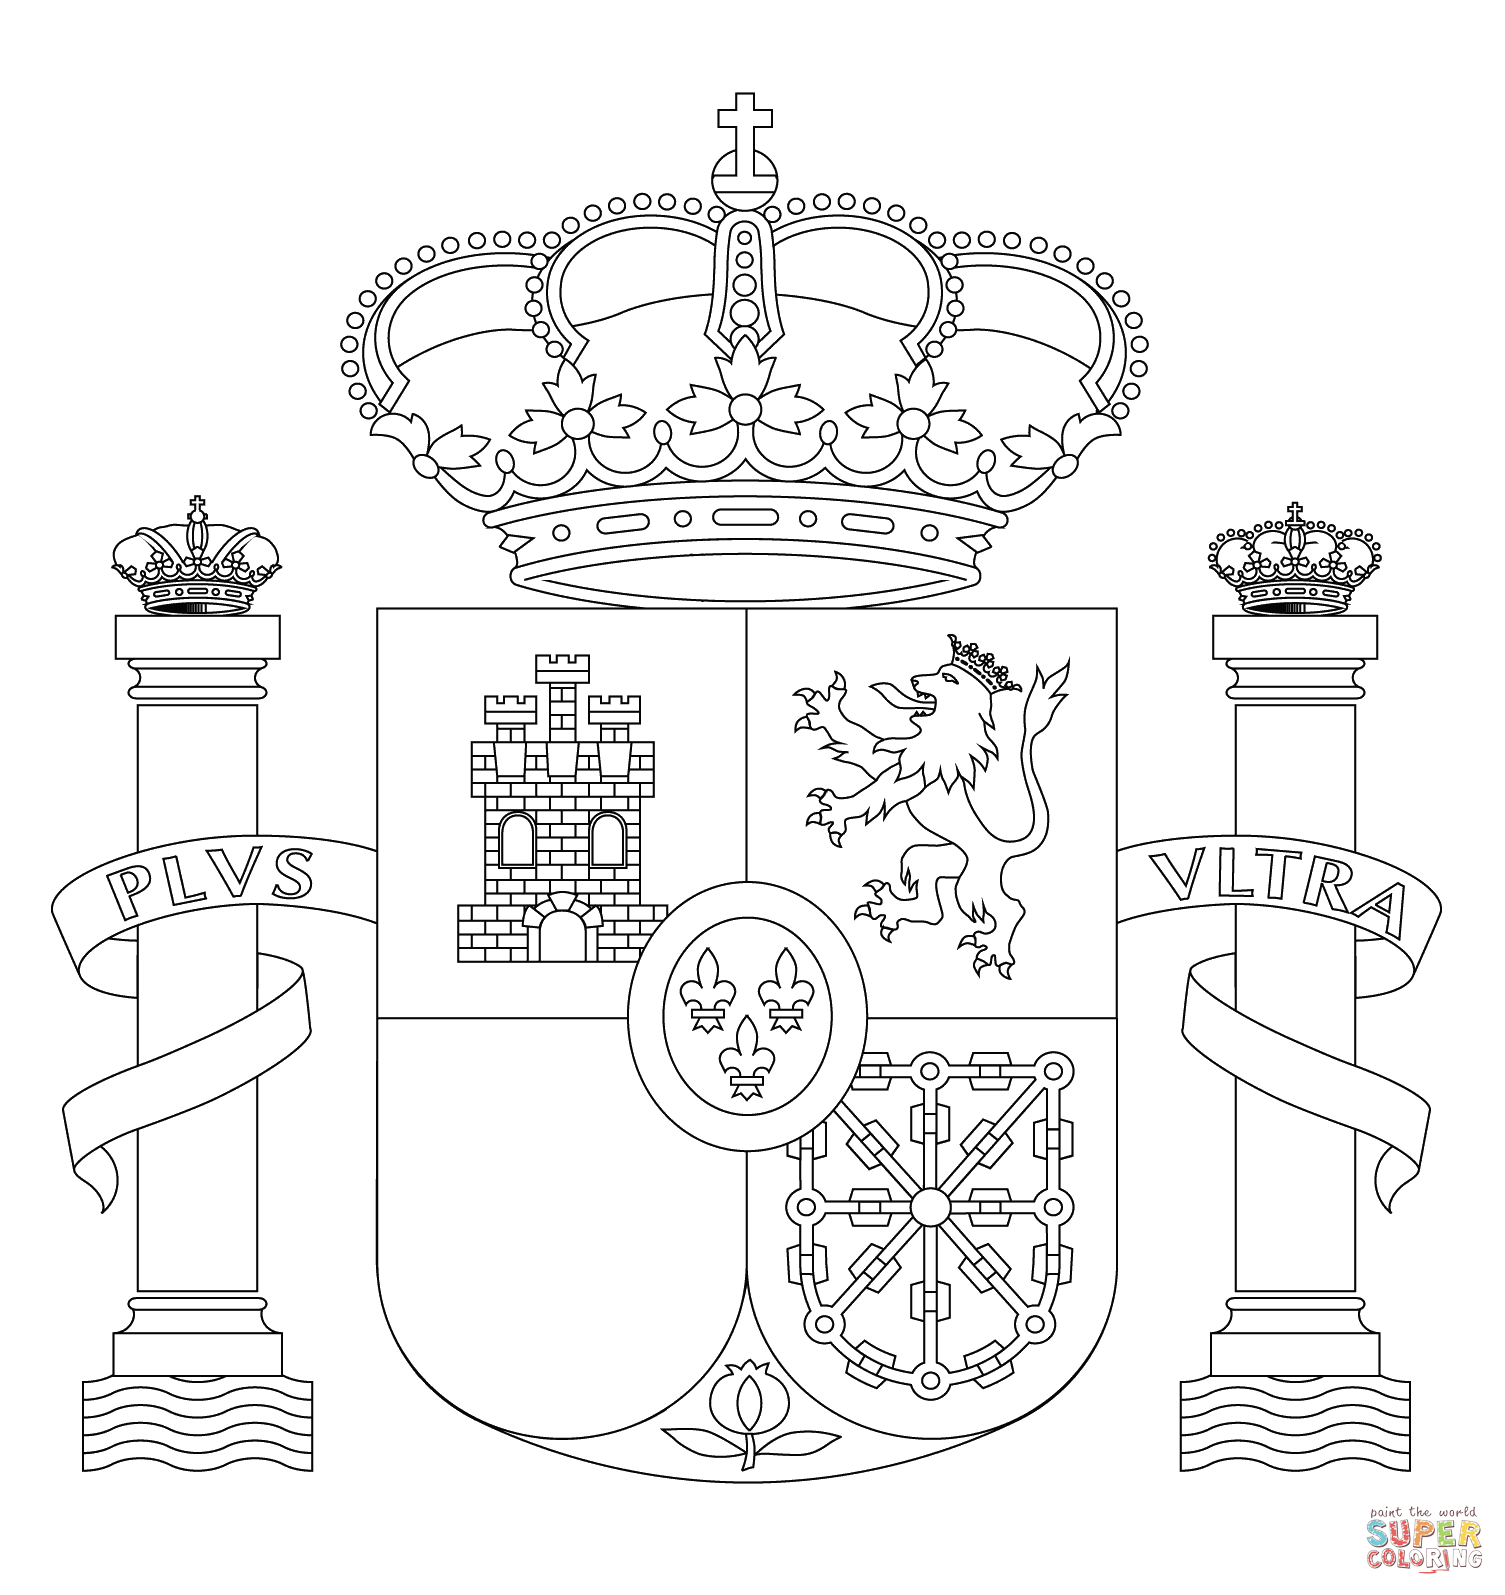 Kids Coloring Page For Spain Coloring Home